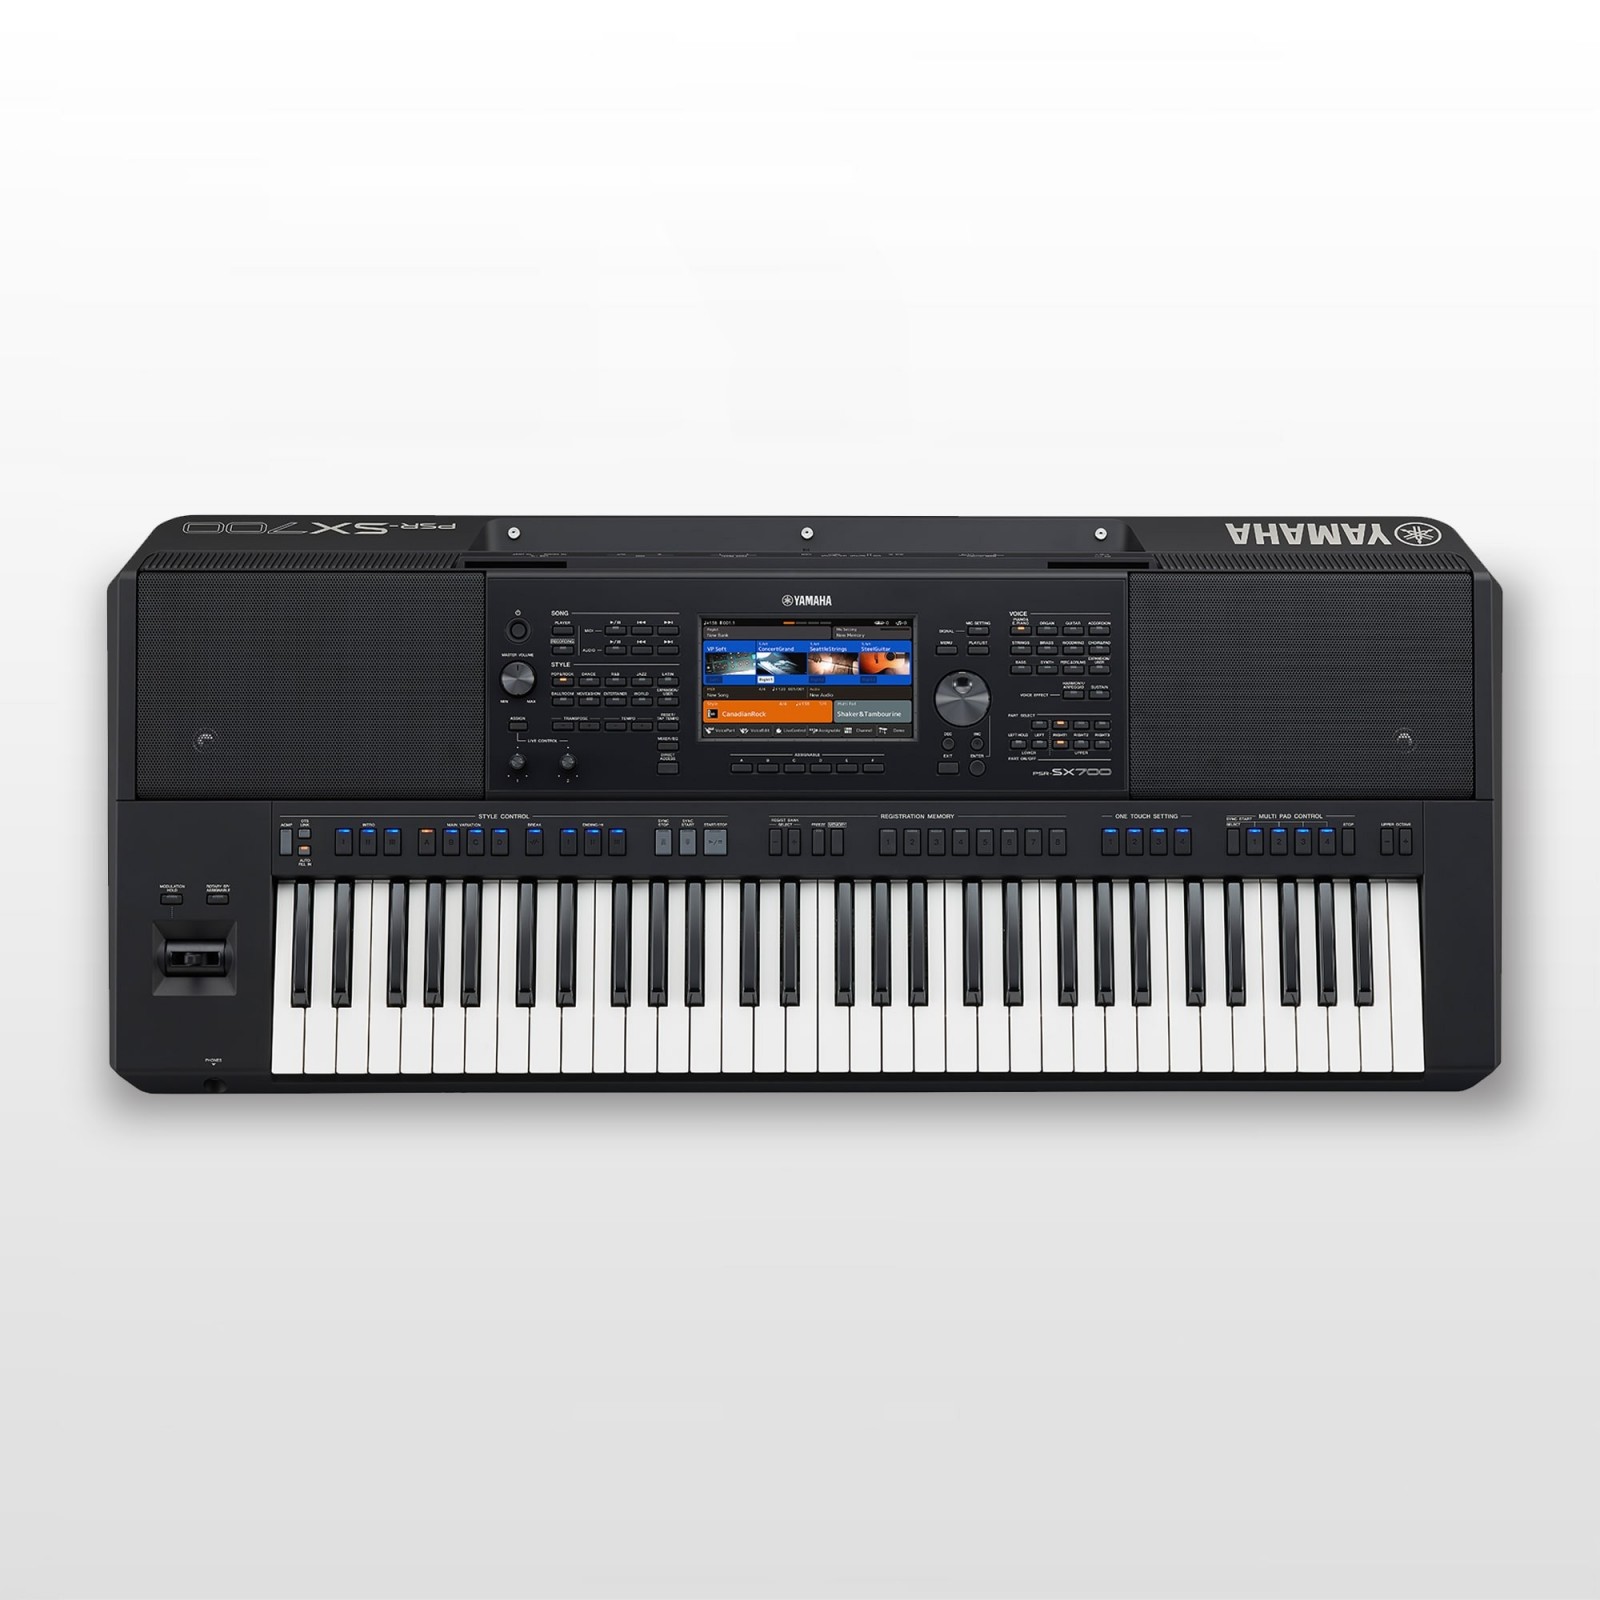 Clavier Piano Numerique Synthes Portable 61 Touches 128 Sons USB